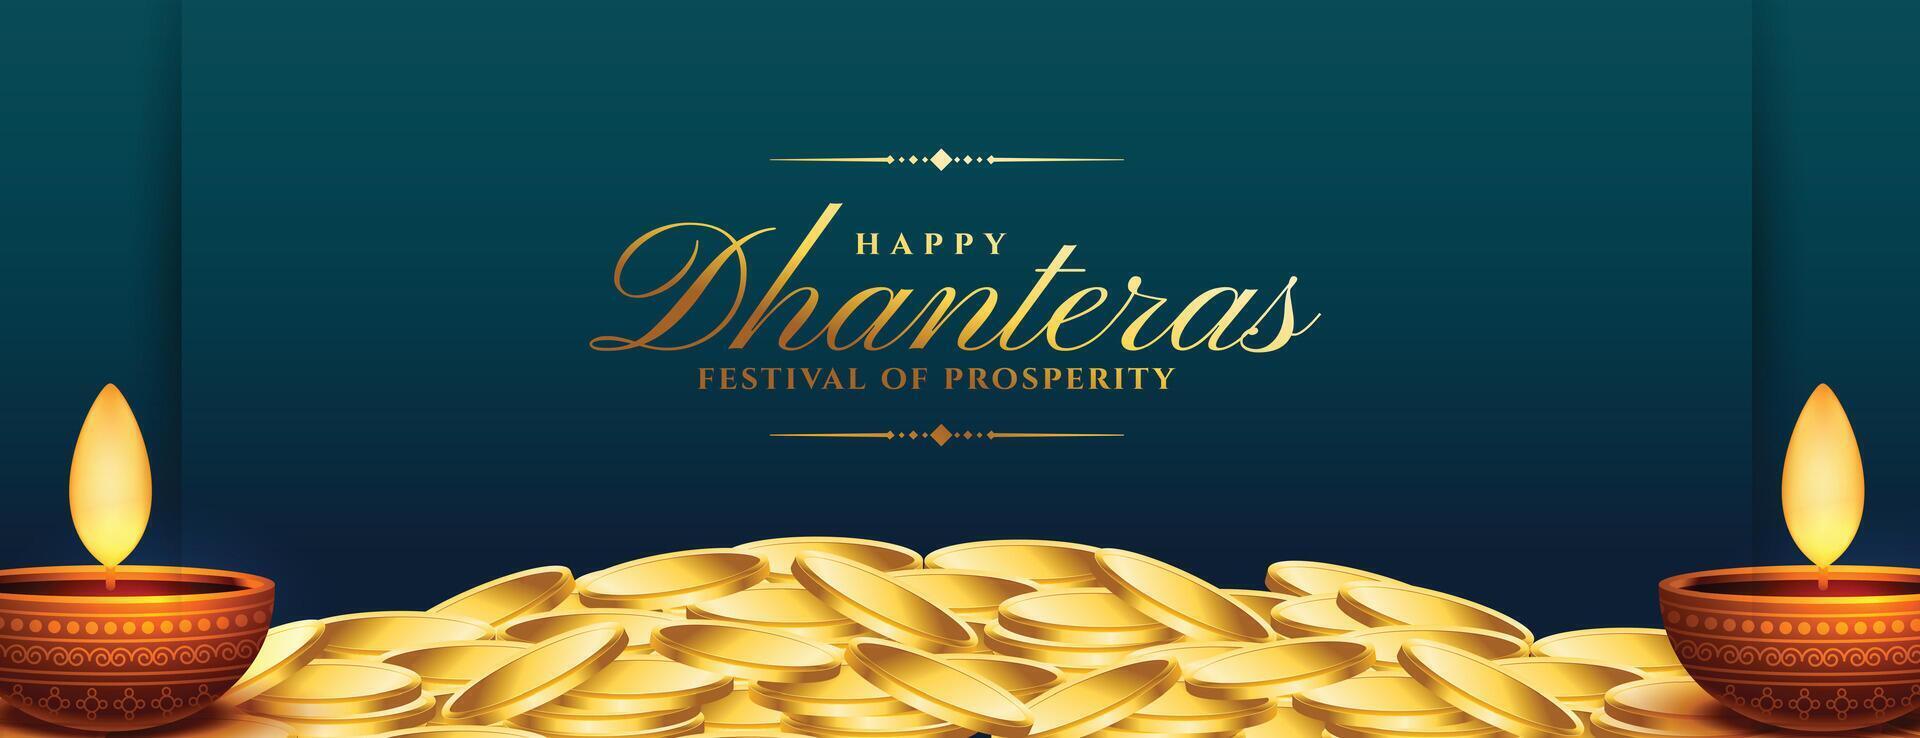 elegant indian festival happy dhanteras religious banner with golden coin and oil lamp vector